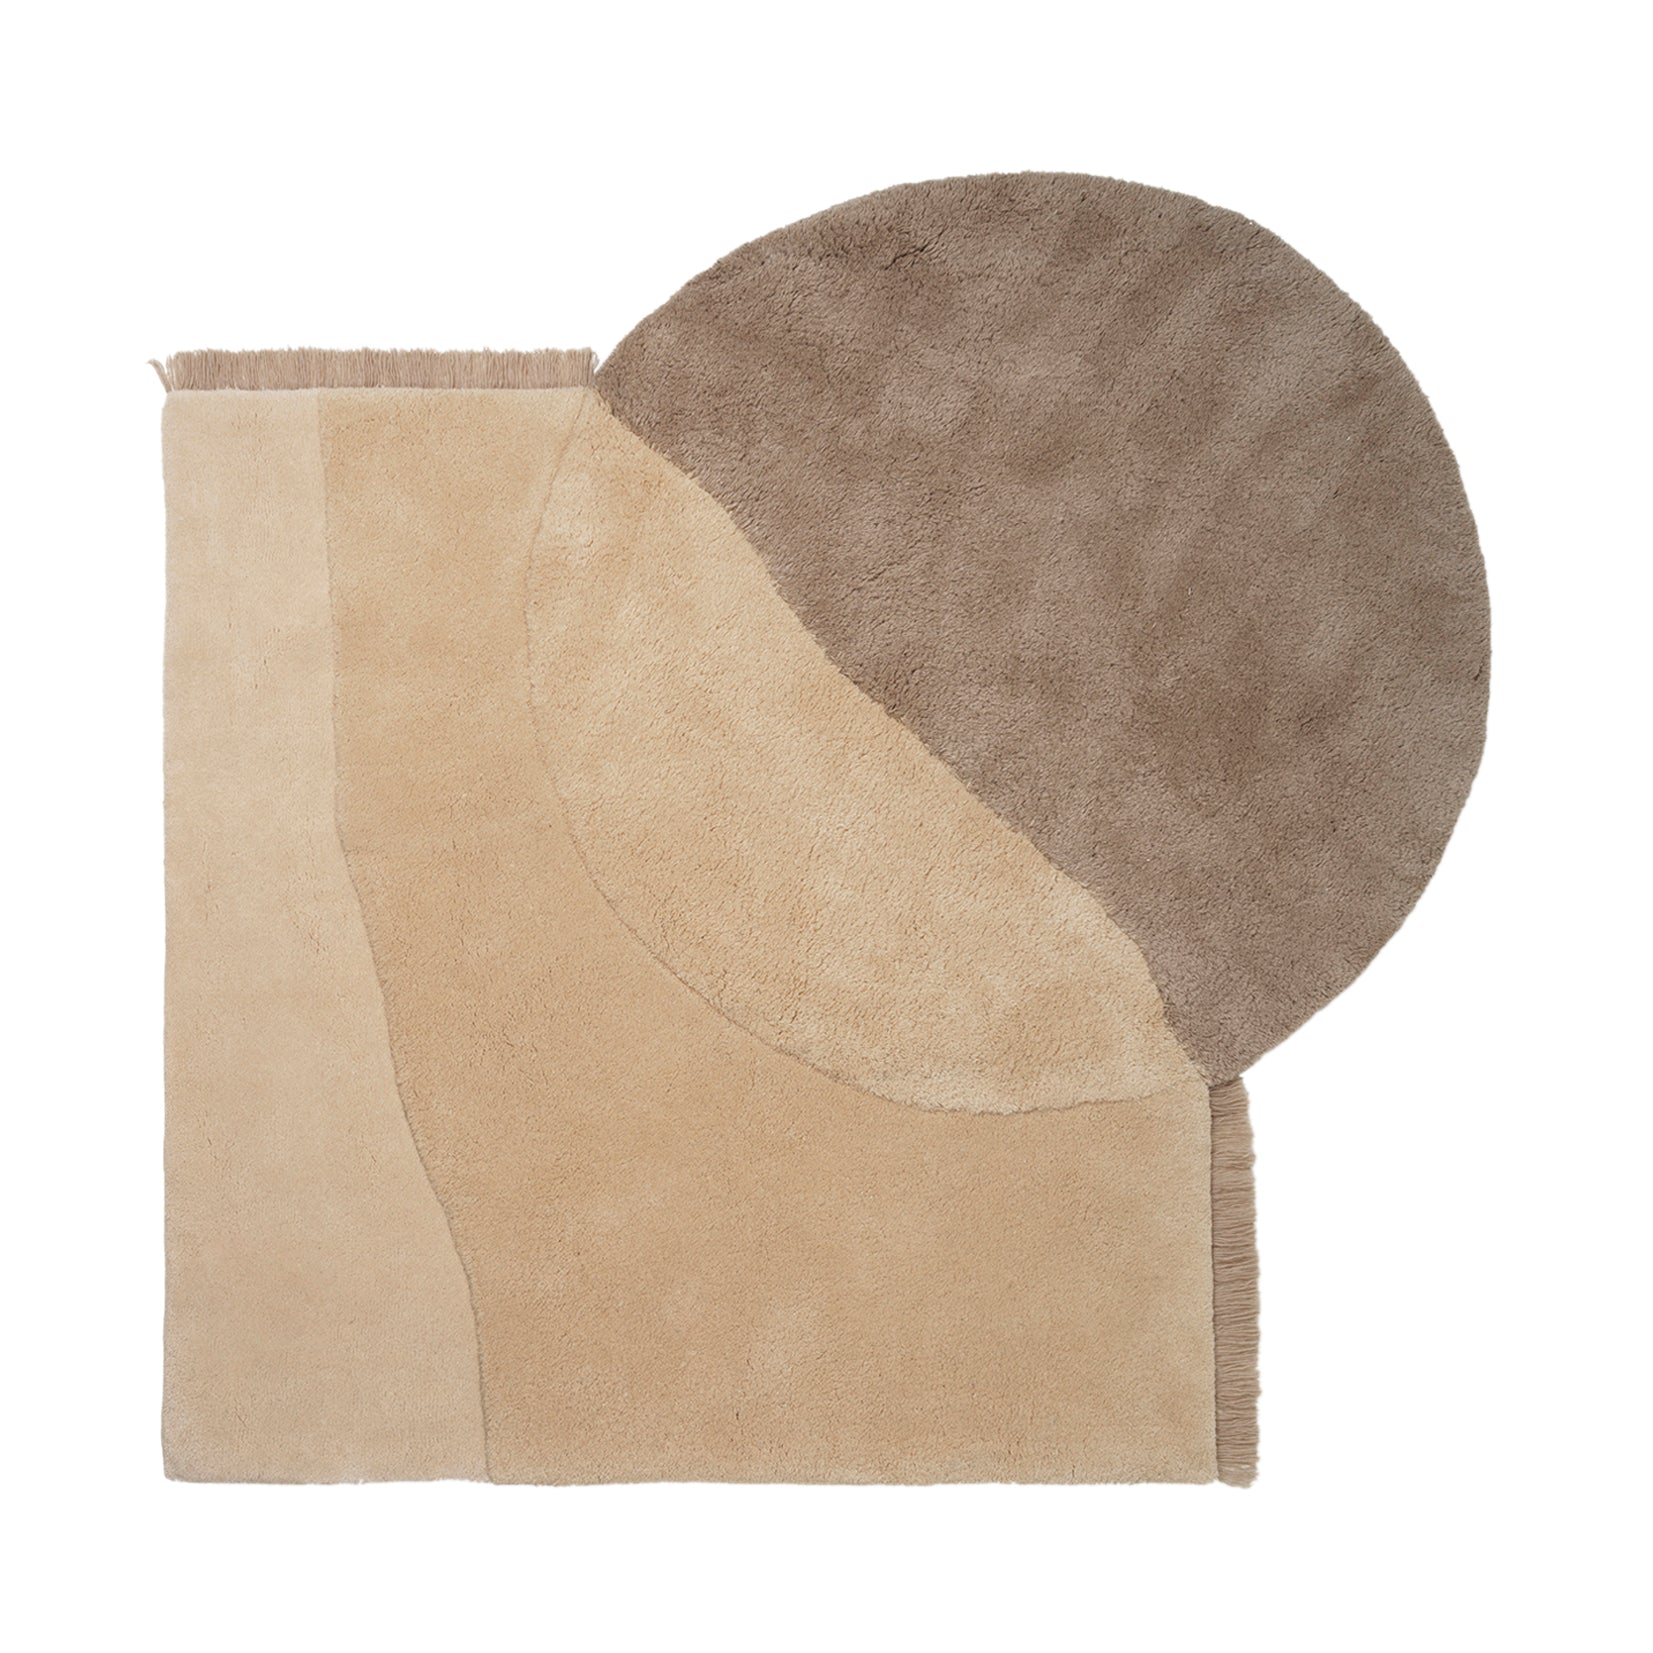 View Tufted Rug: Beige